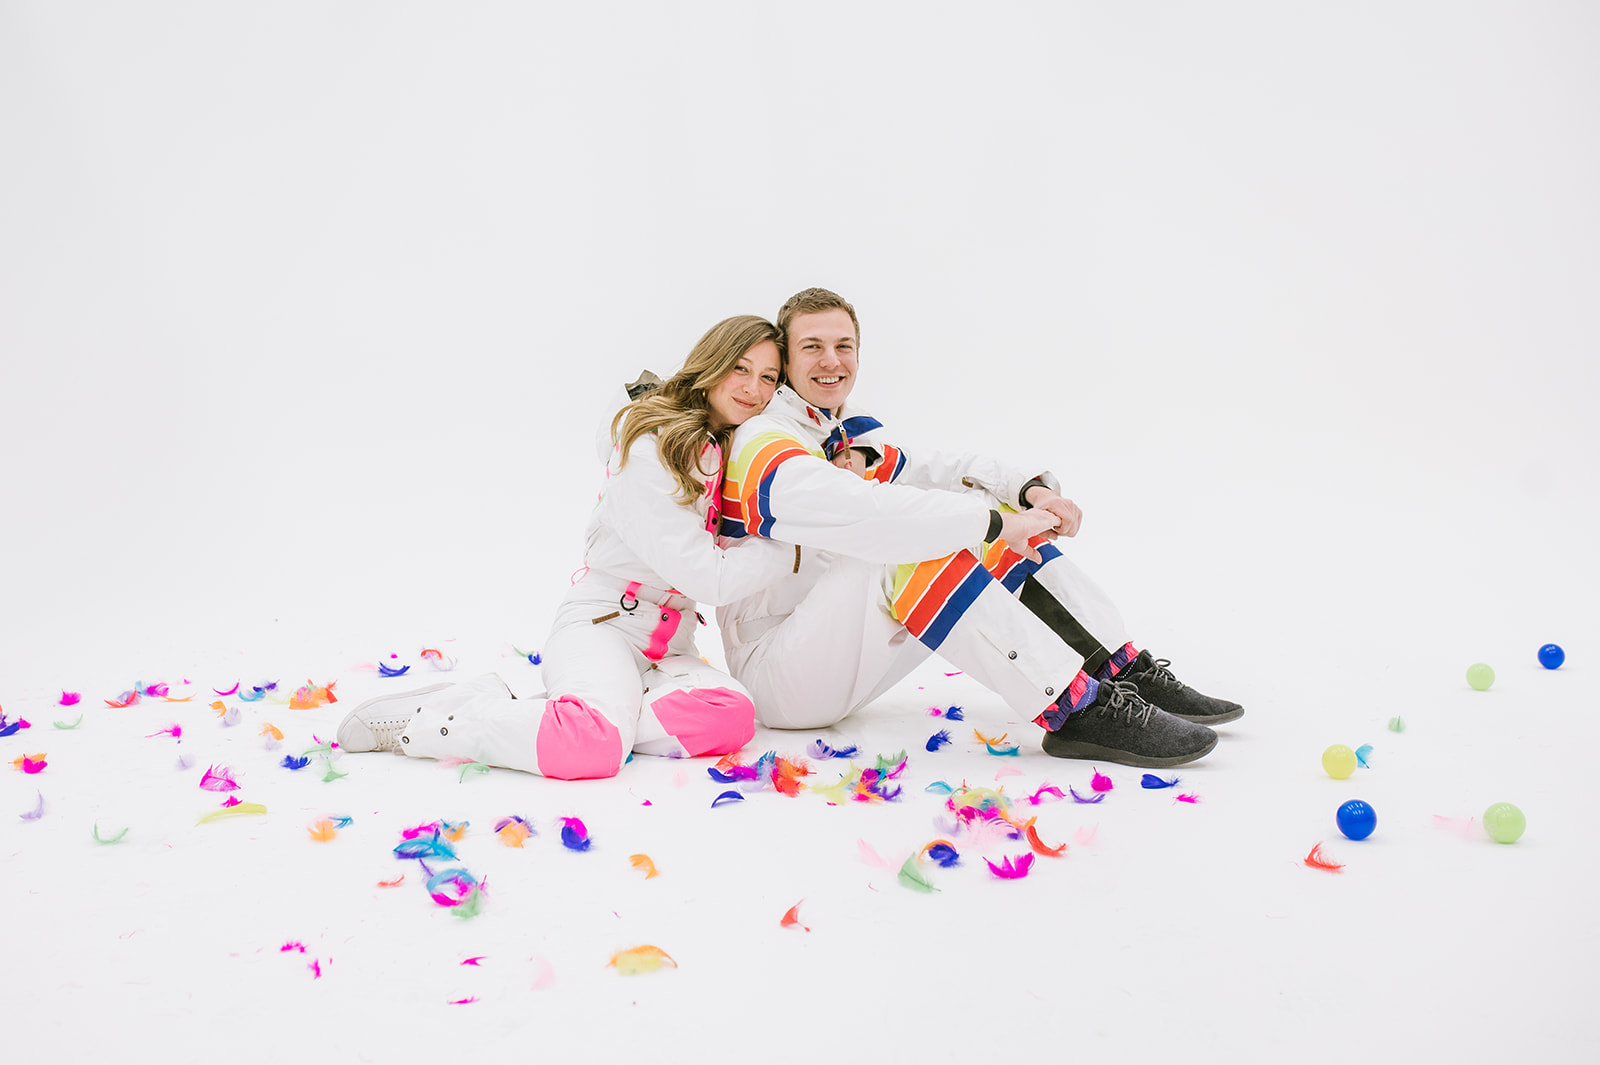  NYC engagement photoshoot in studio with retro outfits 